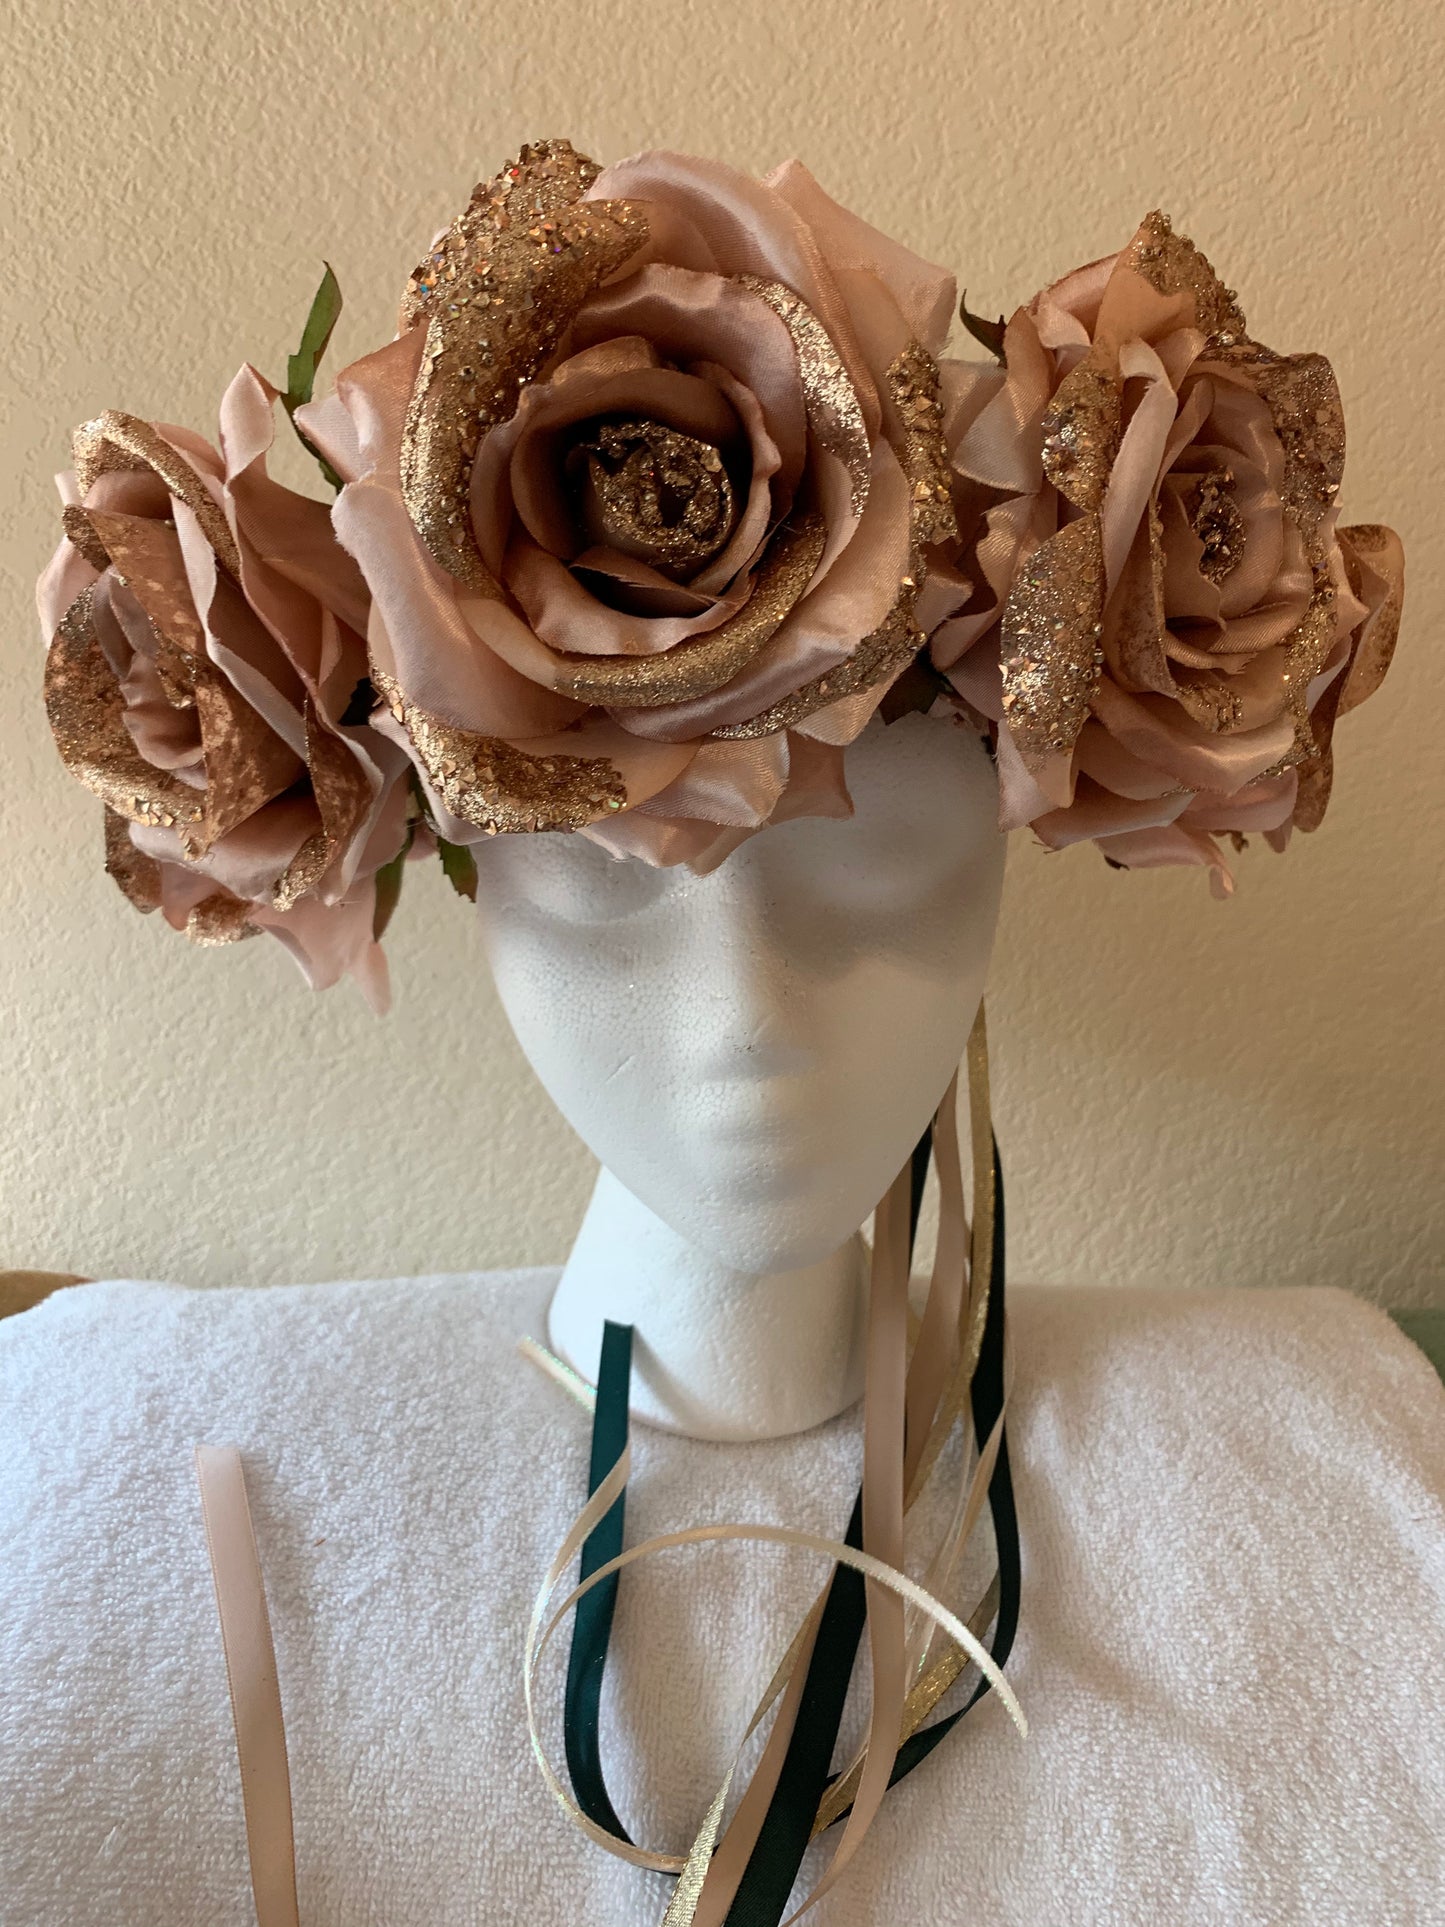 Extra Large Fantasy Wreath - Dusty Pink Roses with Golden Sparkles